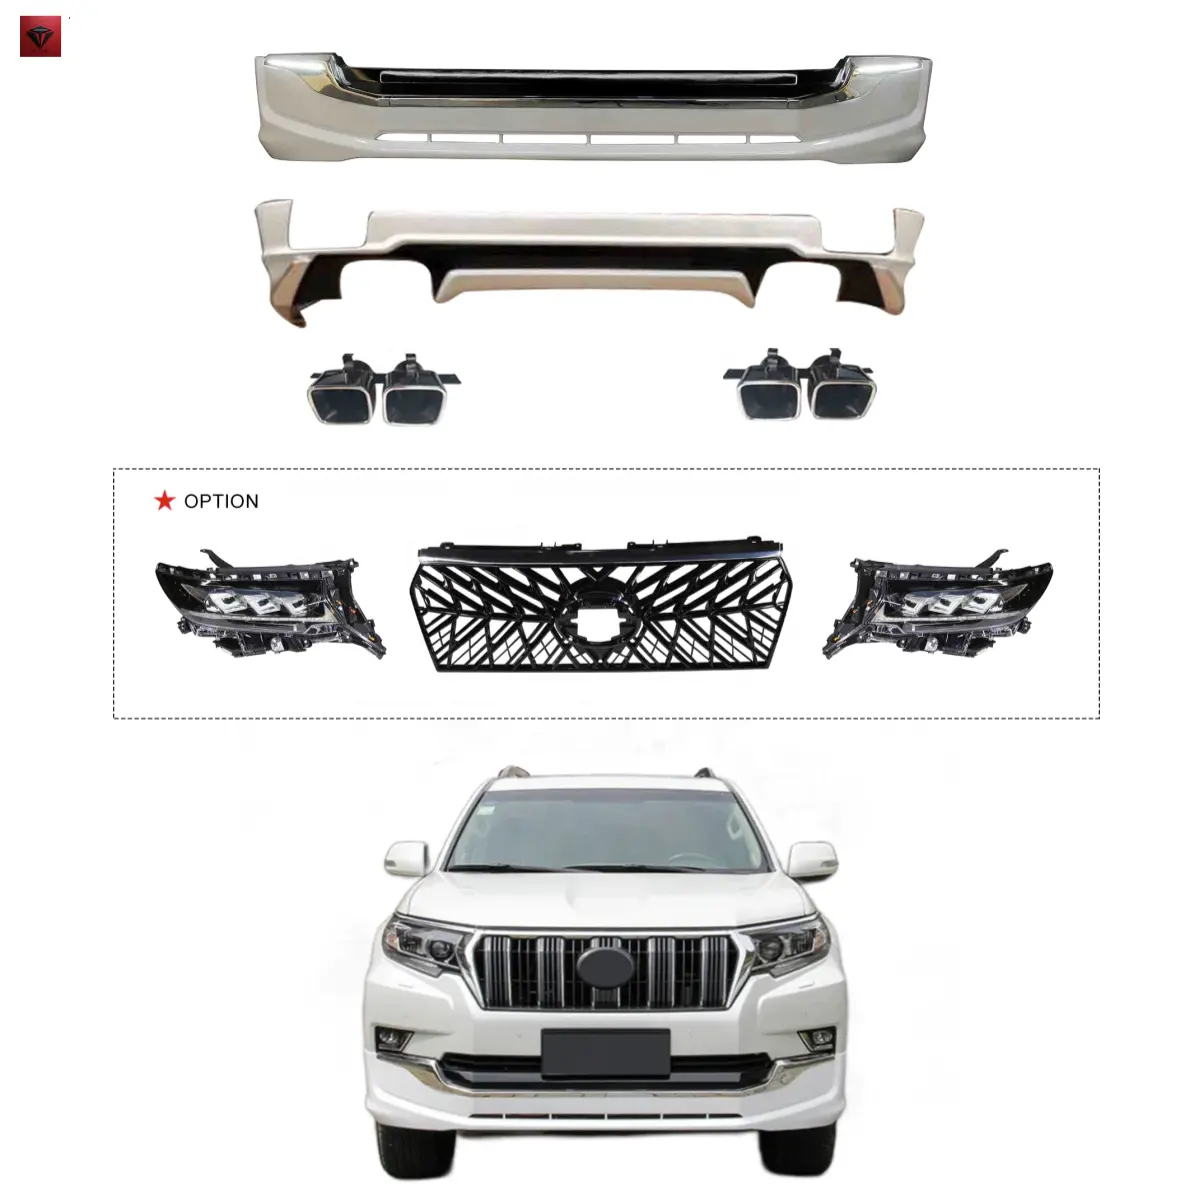 TKZC BODY KIT INCLUDE FRONT/REAR BUMPER LIP With Turn Signal Light GRILLE HEADLIGHT and EXHAUST PIPE Fitted for 2018 PRADO FJ150